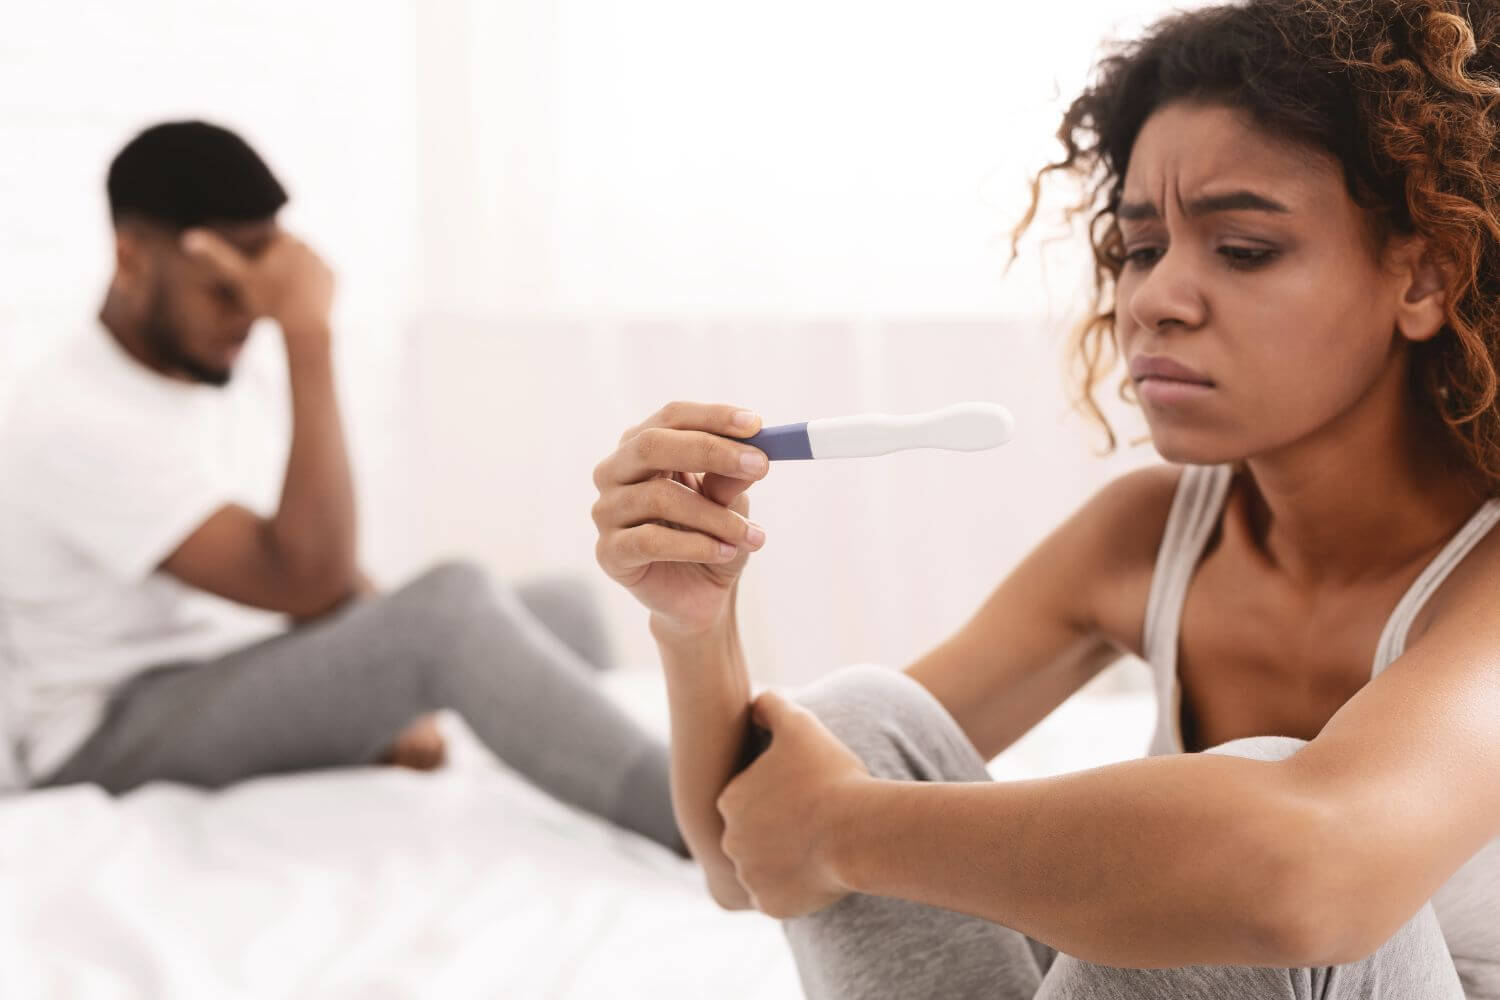 An upset woman looks at a pregnancy test, as her partner holds his head in the background